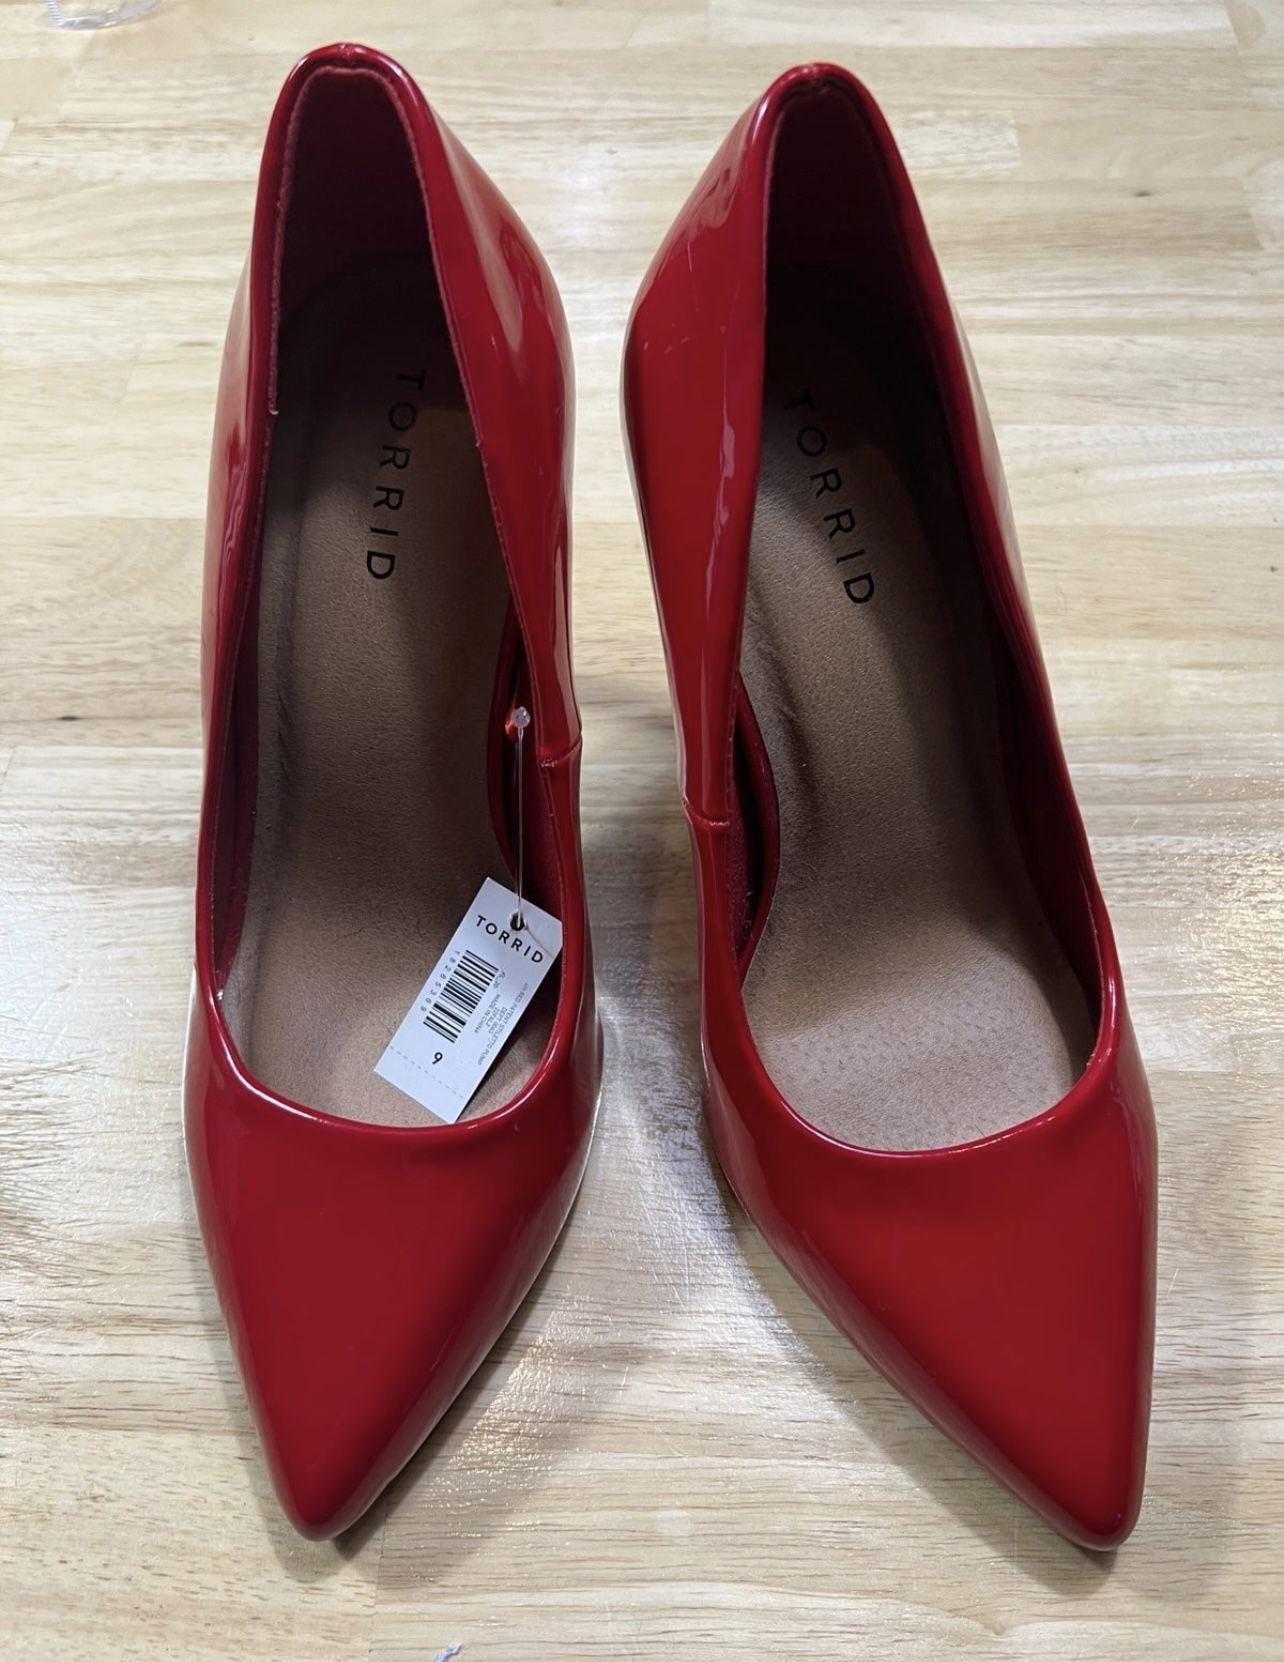 Torrid Red Stilleto Pumps New With tags